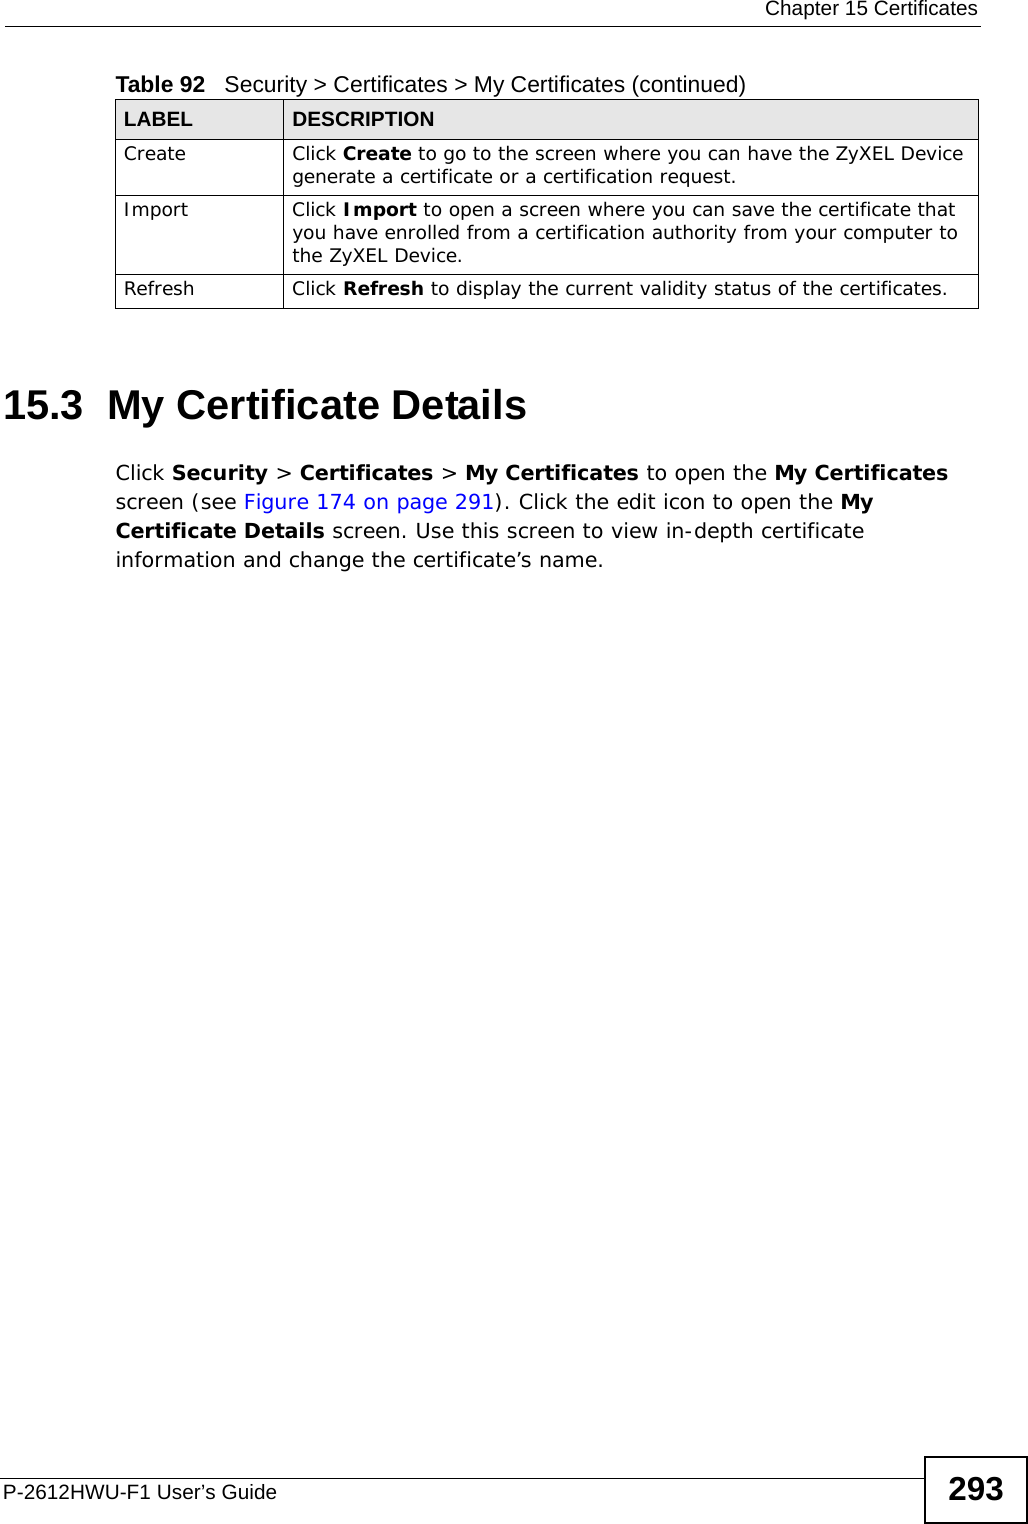  Chapter 15 CertificatesP-2612HWU-F1 User’s Guide 29315.3  My Certificate Details Click Security &gt; Certificates &gt; My Certificates to open the My Certificates screen (see Figure 174 on page 291). Click the edit icon to open the My Certificate Details screen. Use this screen to view in-depth certificate information and change the certificate’s name. Create Click Create to go to the screen where you can have the ZyXEL Device generate a certificate or a certification request.Import Click Import to open a screen where you can save the certificate that you have enrolled from a certification authority from your computer to the ZyXEL Device.Refresh Click Refresh to display the current validity status of the certificates.Table 92   Security &gt; Certificates &gt; My Certificates (continued)LABEL DESCRIPTION